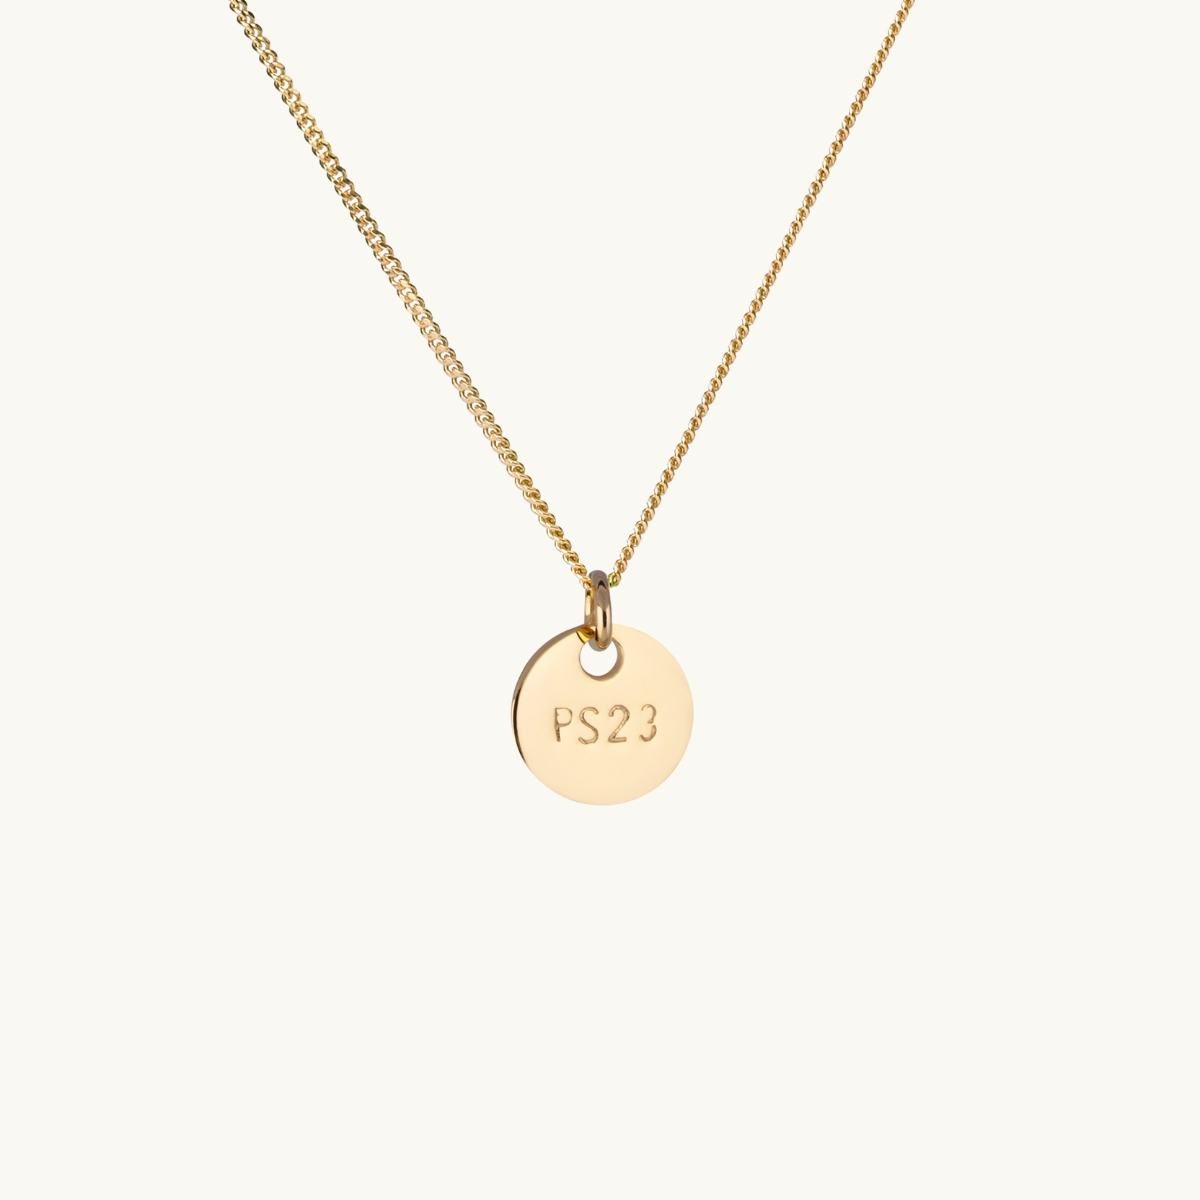 Necklace in gold with a coin ps23